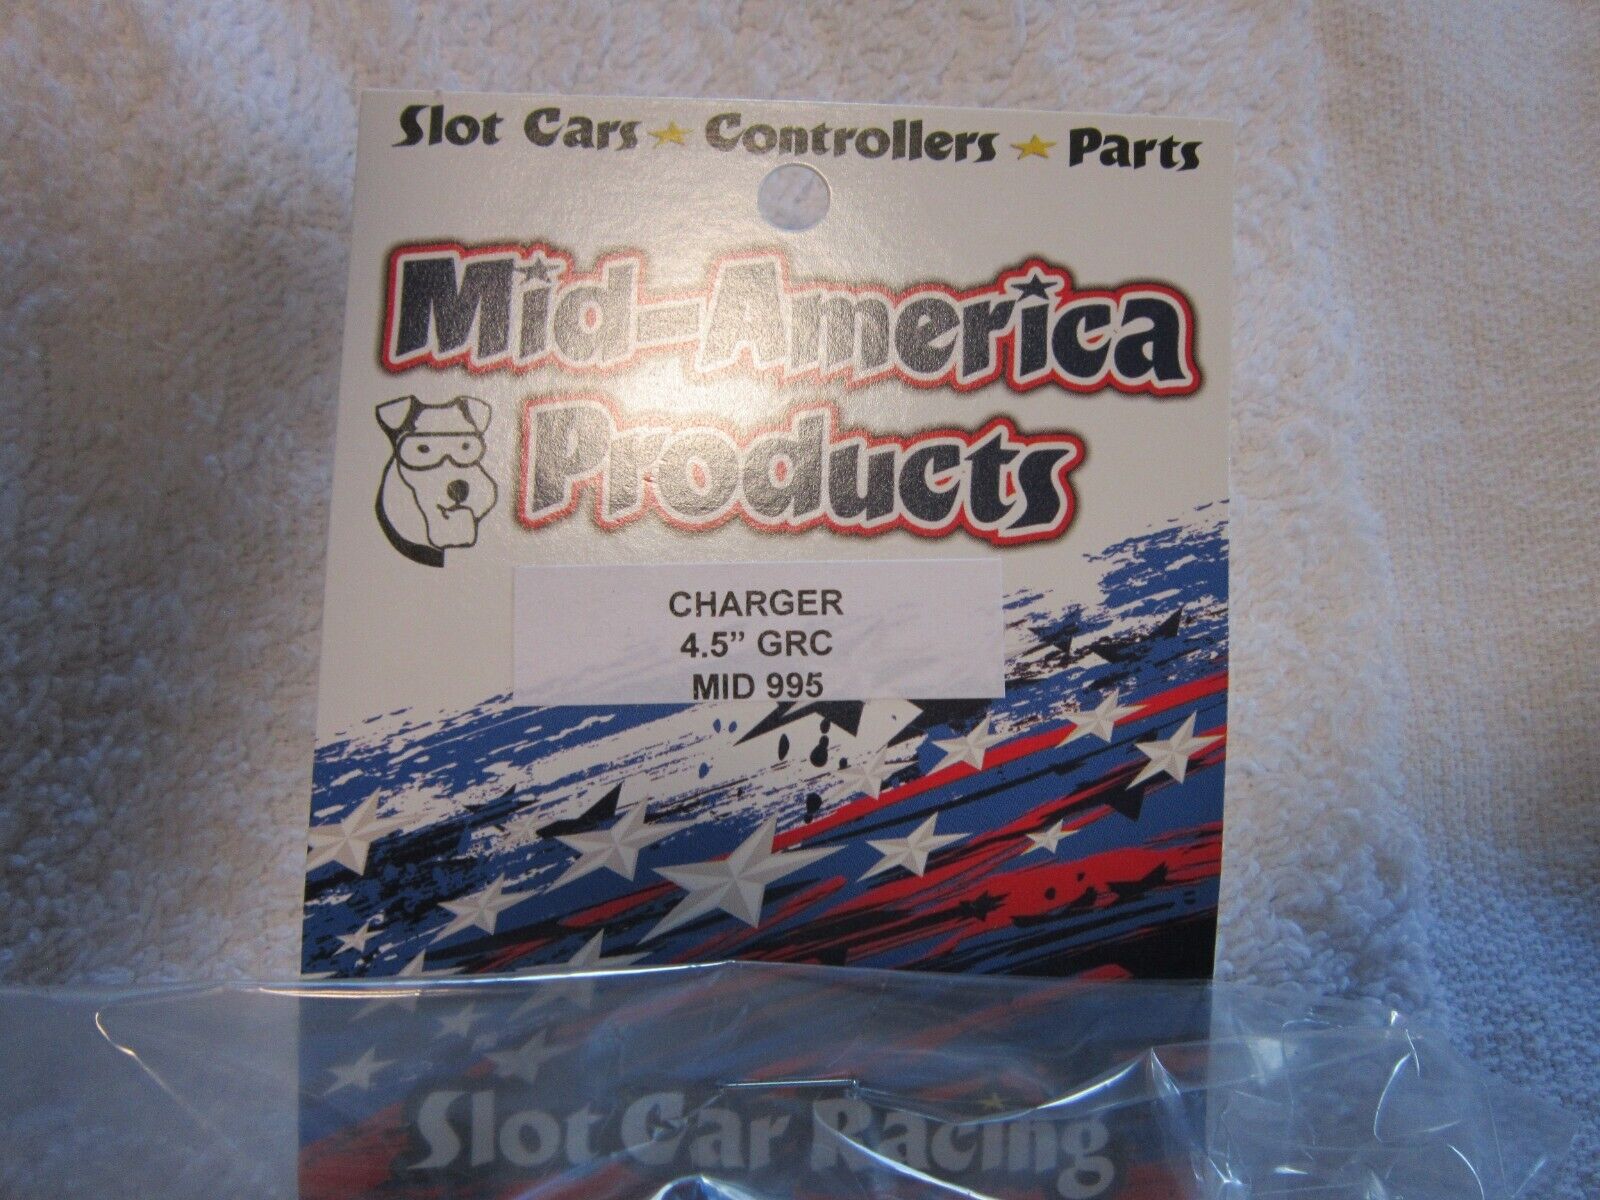 Mid America  Charger Stock Car Retro 1/24 0.10 Clear Lexan Body 4.5 With Mask